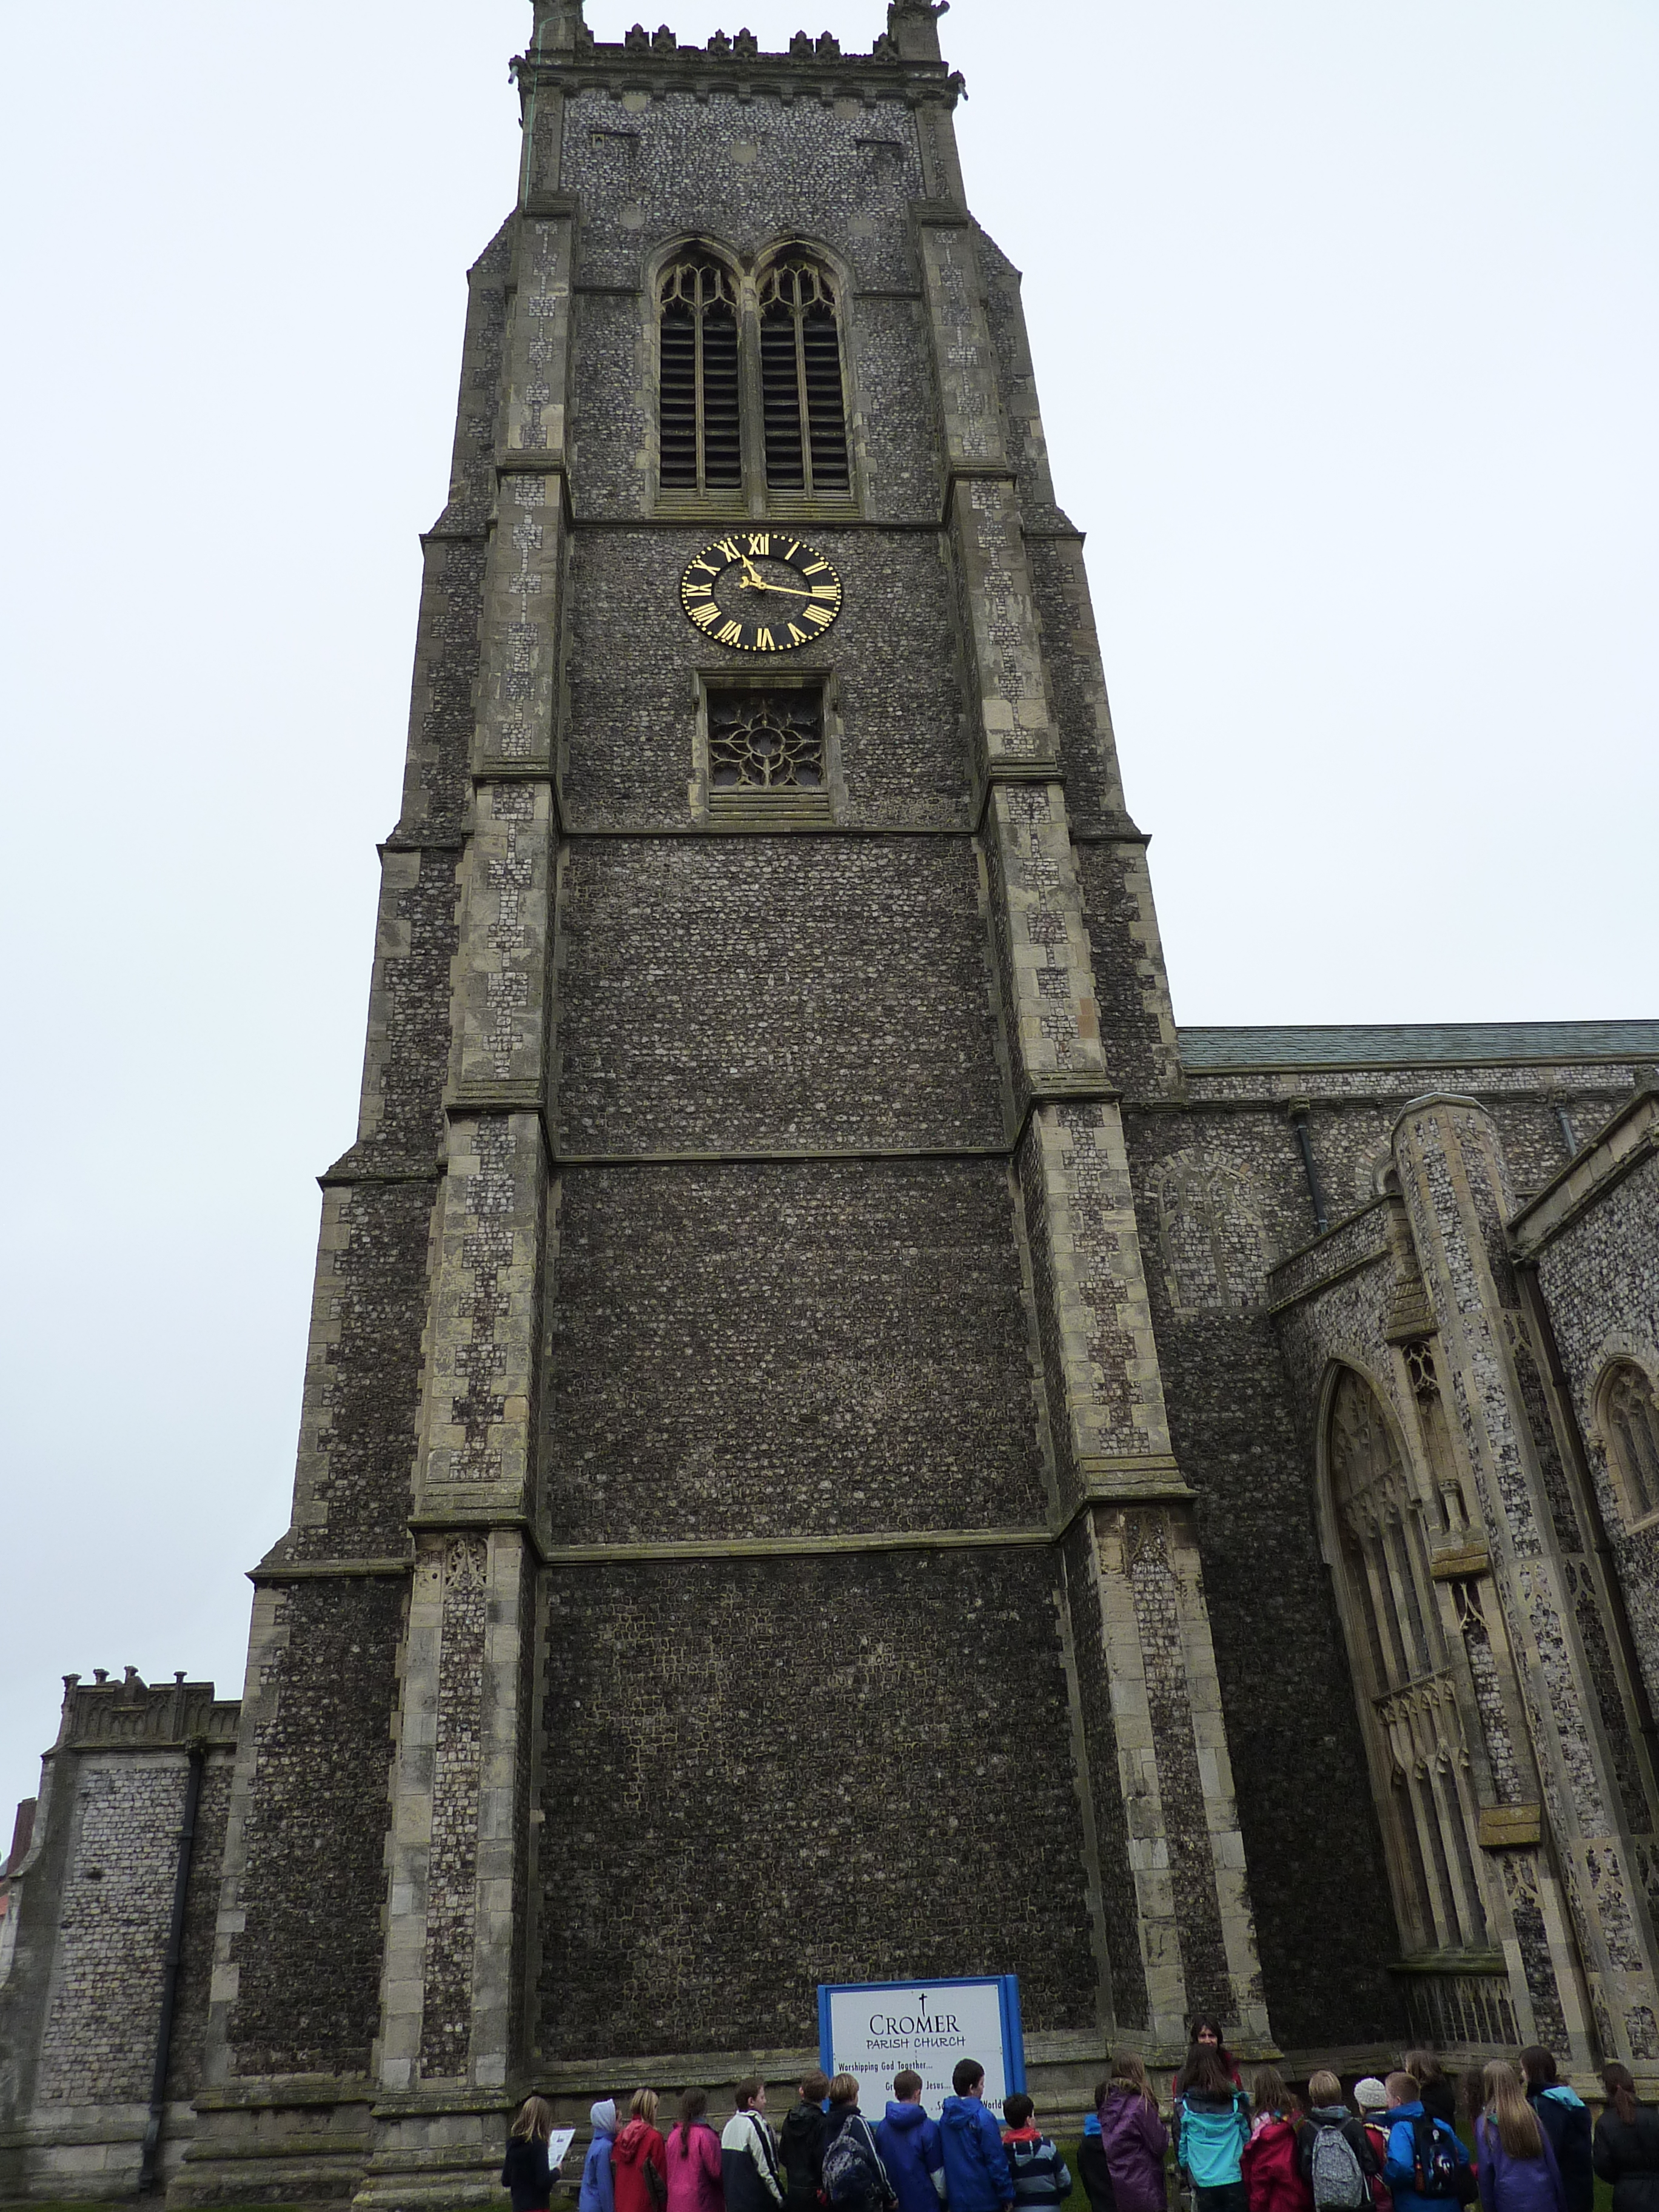 Tuesday Evening (photos of Cromer church with us in front and the ...